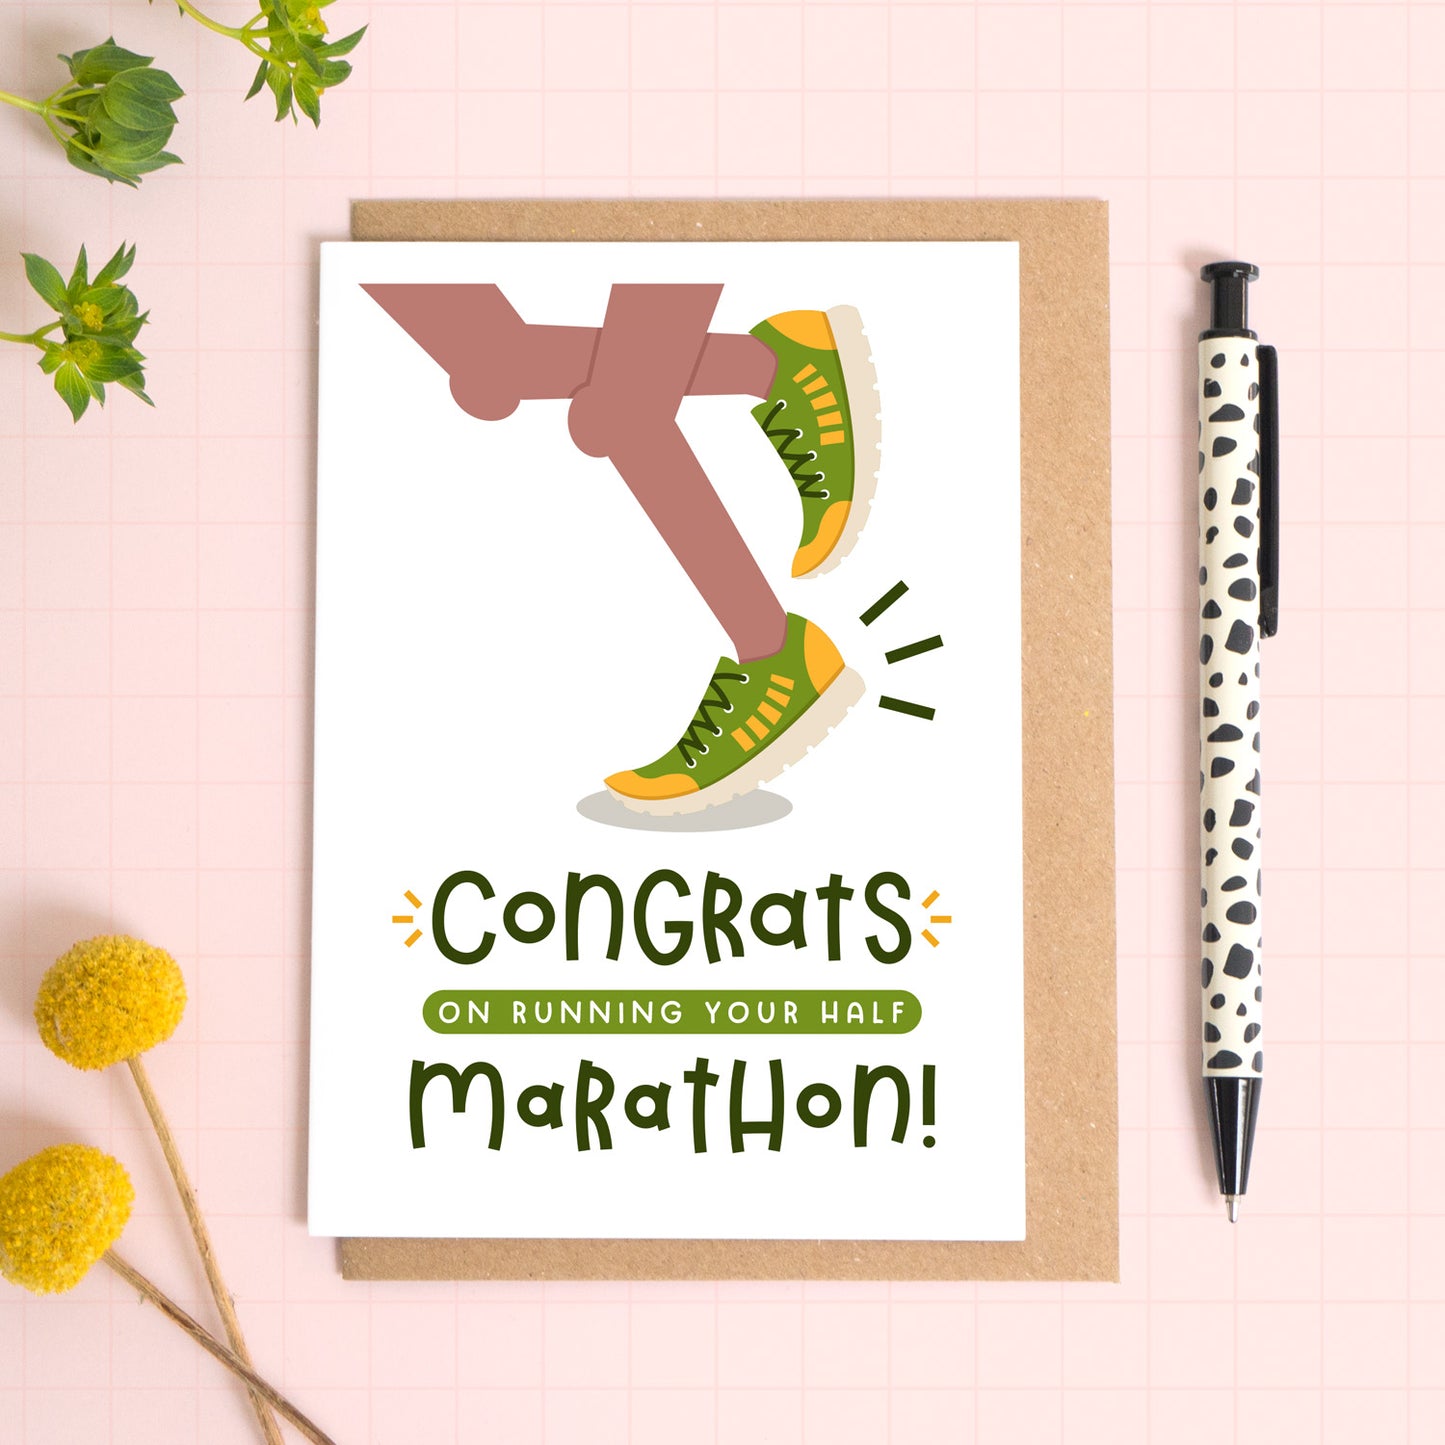 A half marathon congratulations card photographed on top of a kraft brown envelope set on a pink background surrounded by foliage and a pen for scale. The card reads 'congrats on running your half marathon' and features a pair of brown legs.